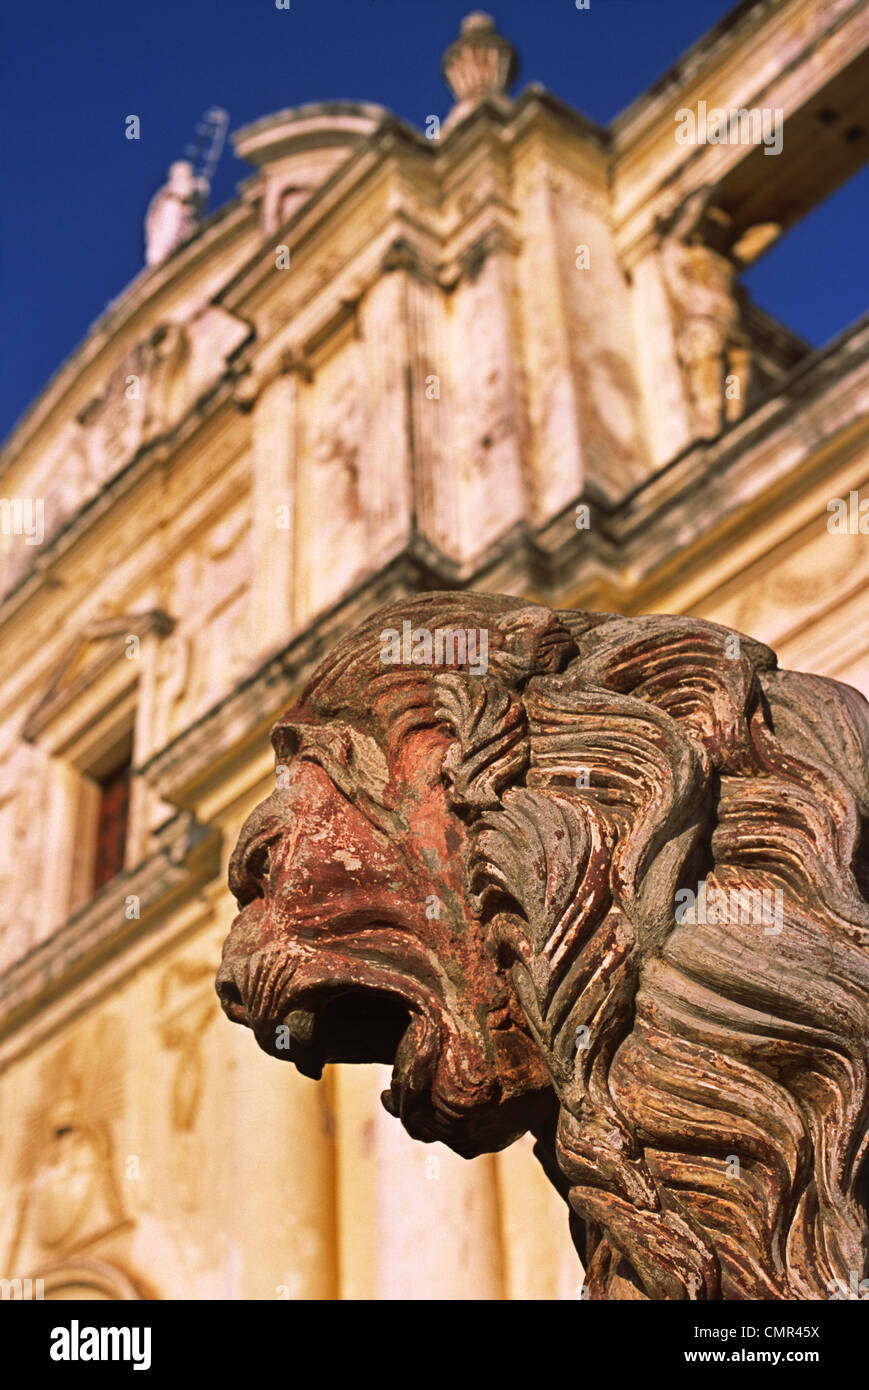 The Statue Of The Roaring Lion High Resolution Stock Photography And Images Alamy